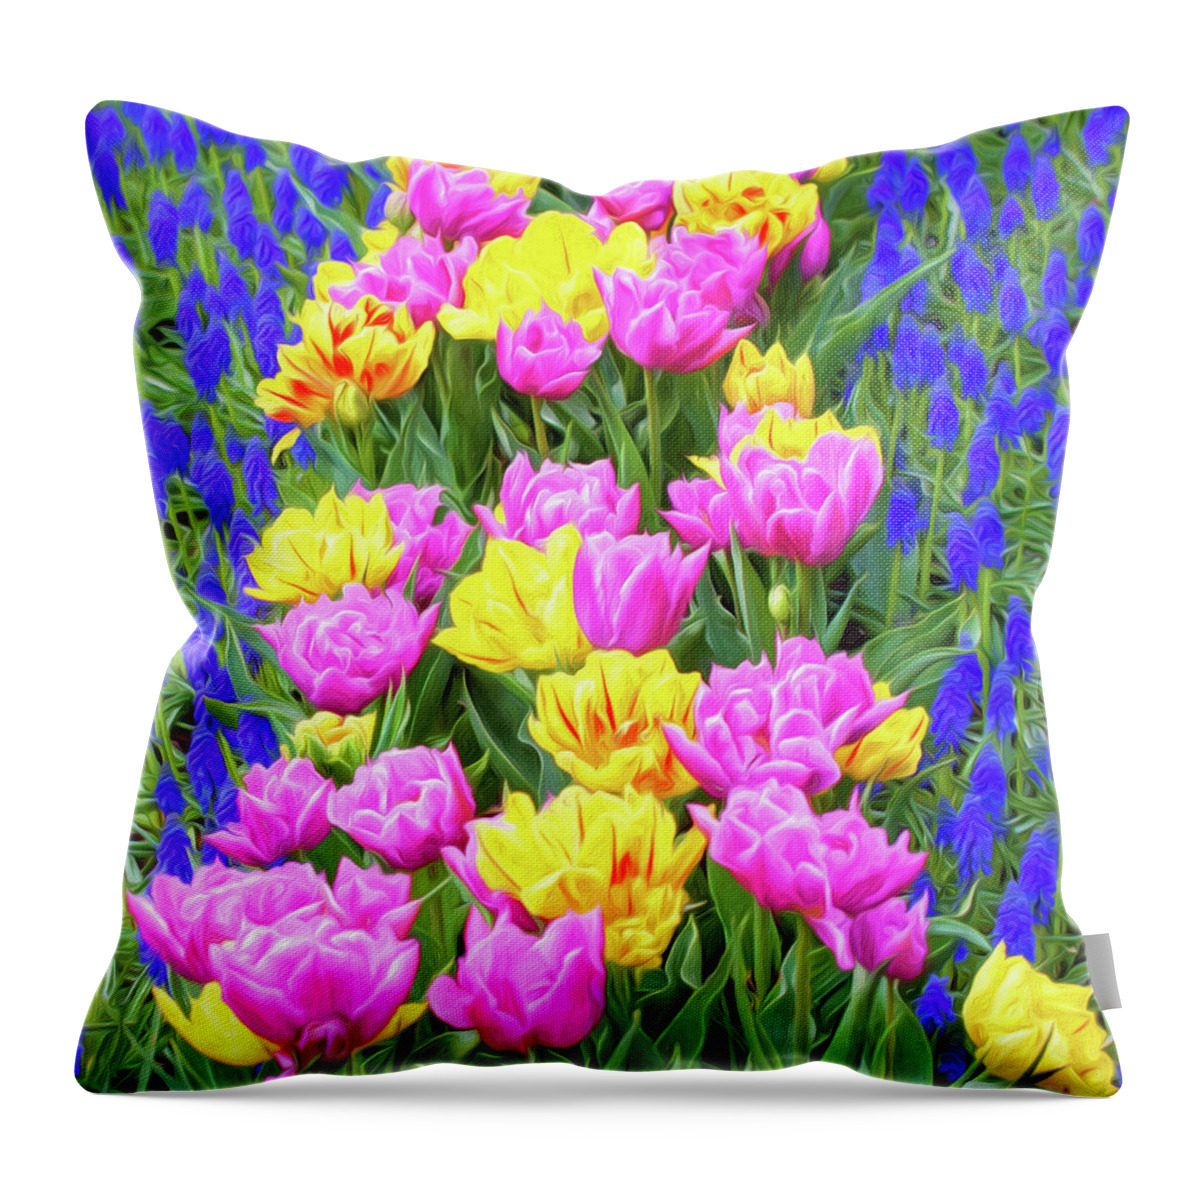 Tulips Throw Pillow featuring the mixed media Springtime Tulips 01 Painterly Effect by Carol Leigh